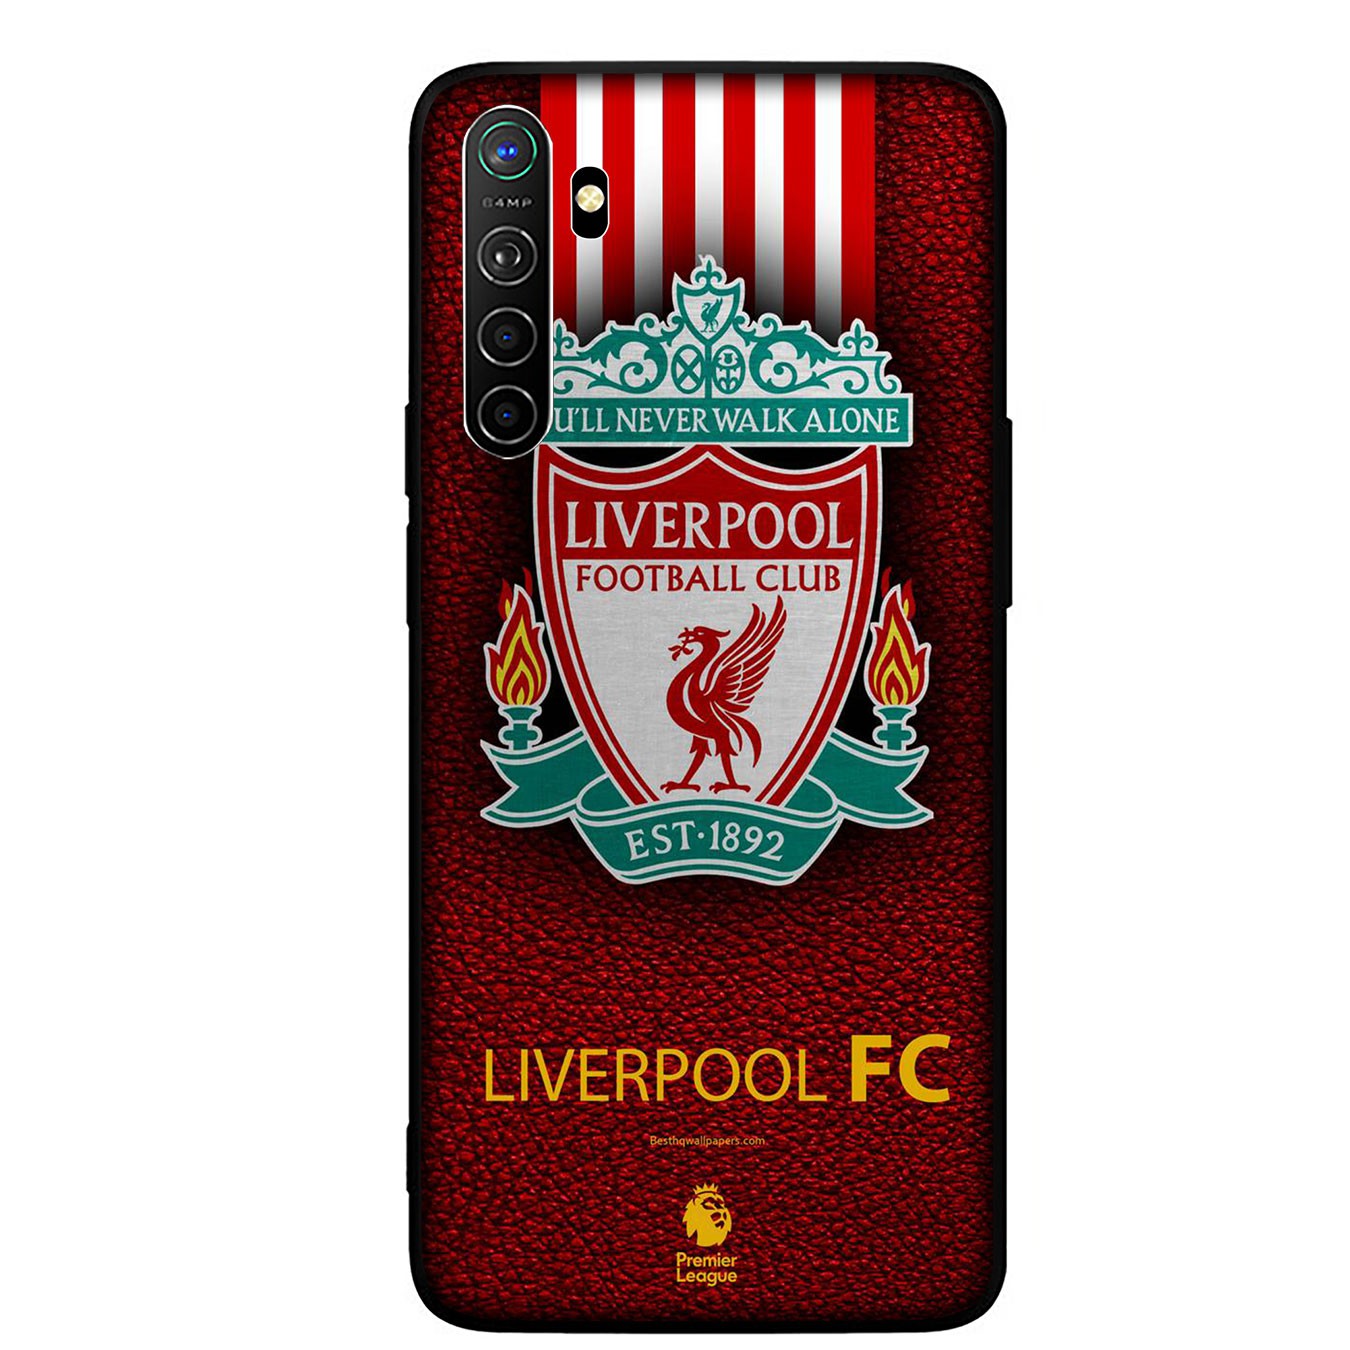 Samsung Galaxy A11 A31 A10 A20 A30 A50 A10S A20S A30S A50S A71 A51 Casing Soft Silicone Liverpool red Logo Phone Case